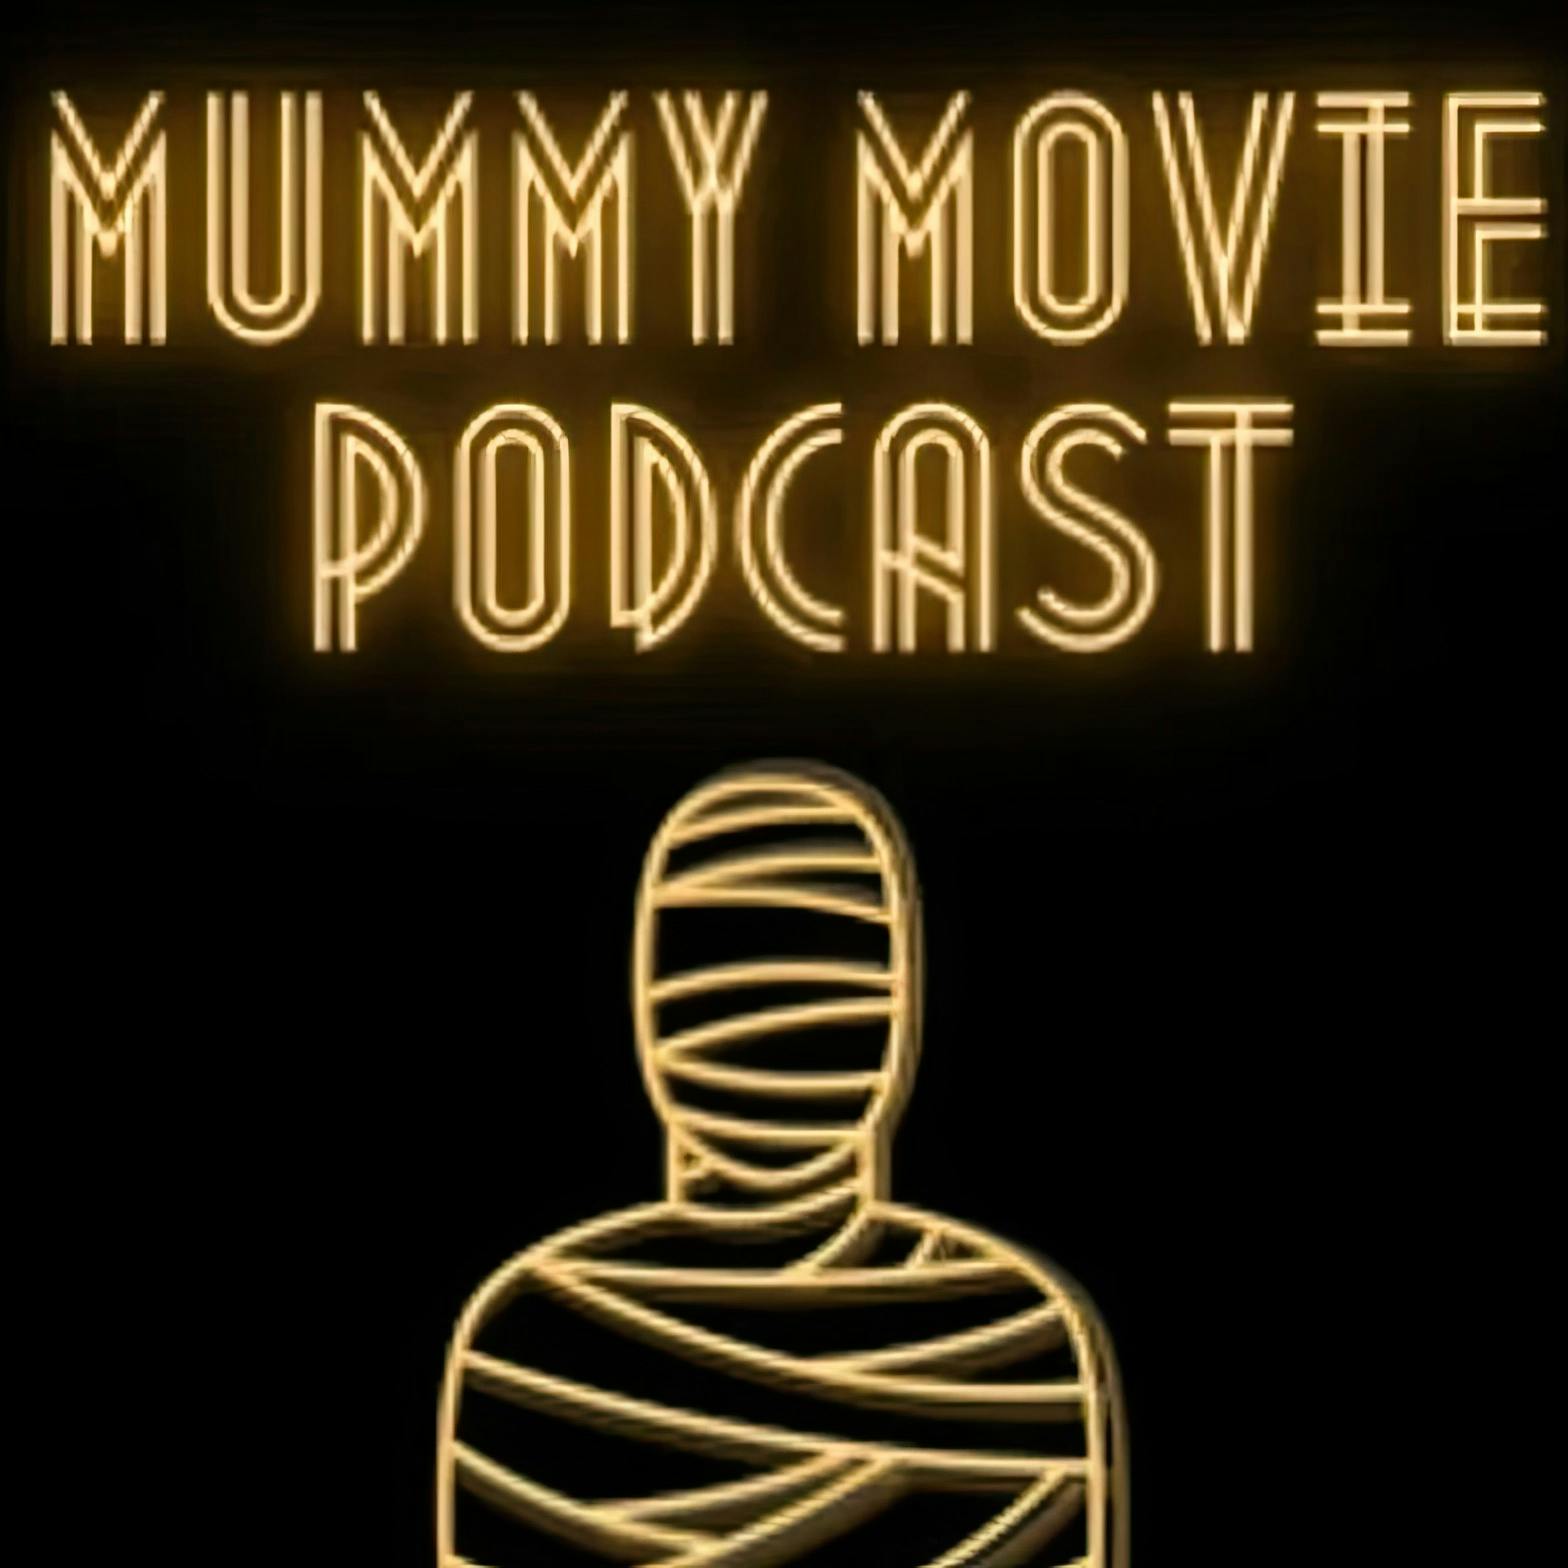 Introducing: The Mummy Movie Podcast!